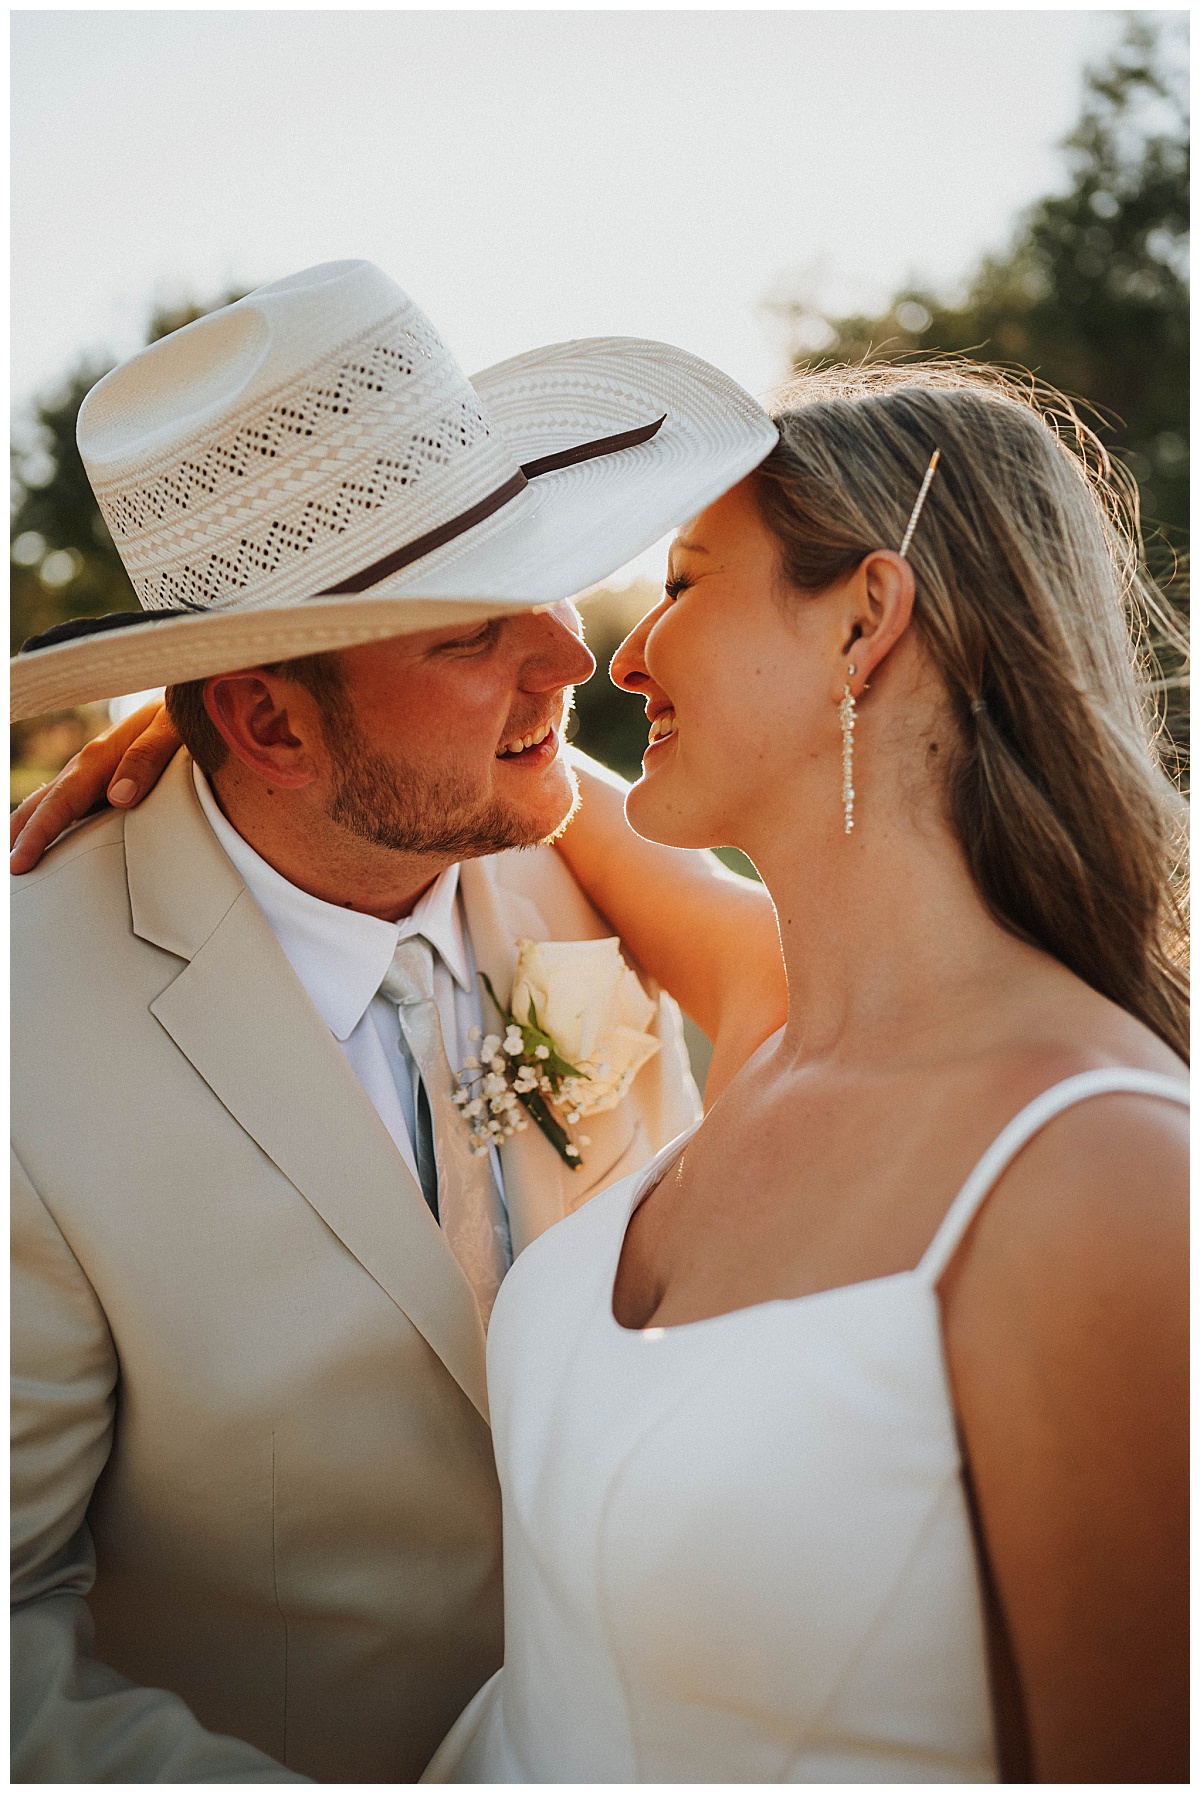 Newlyweds lean together by Amarillo portrait photographer